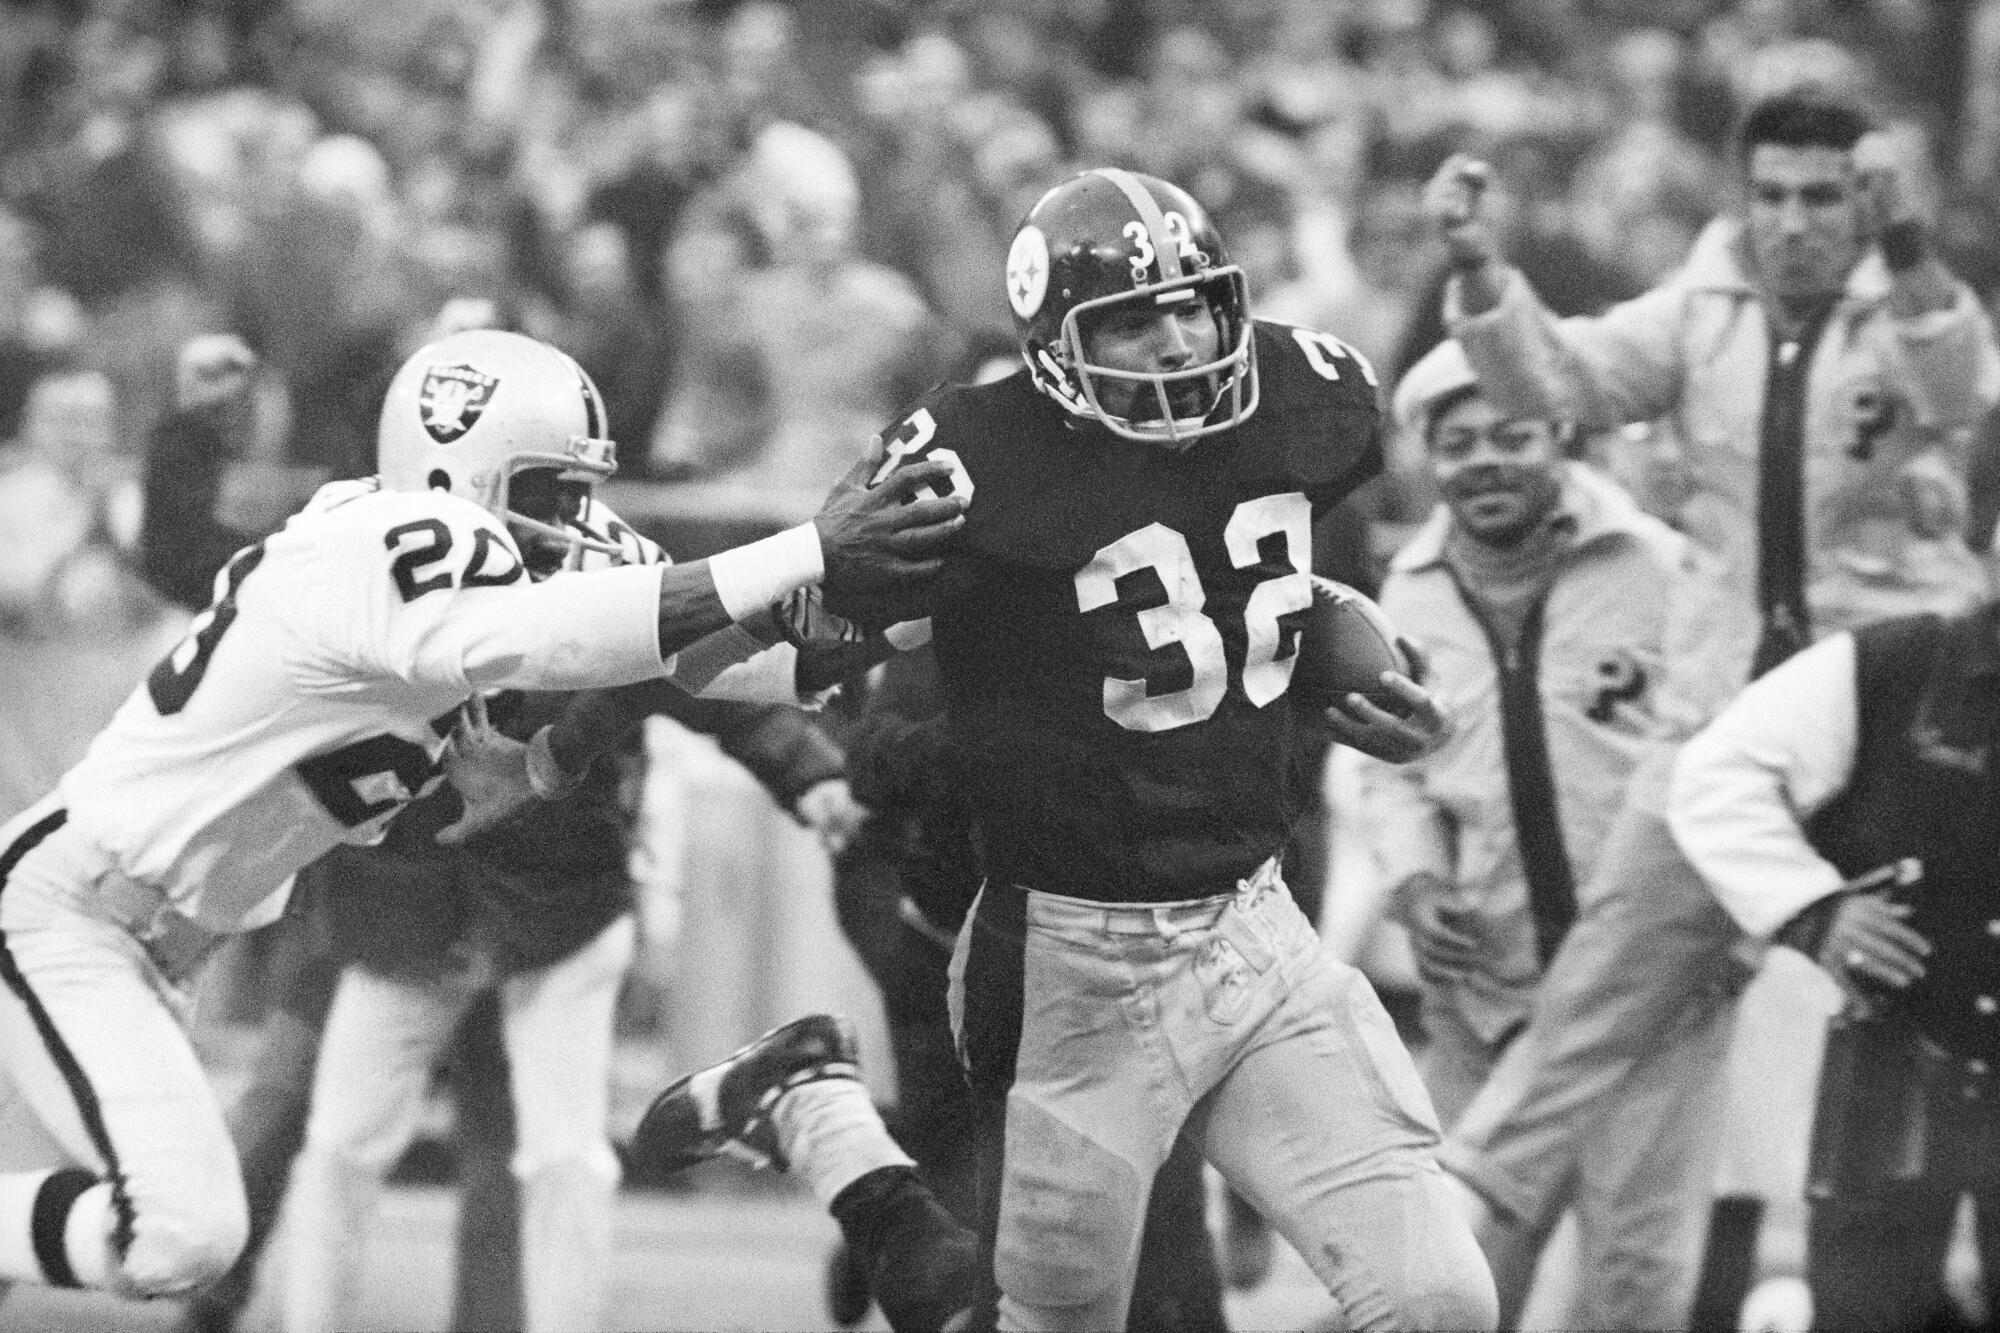 Immaculate Reception at 50: How it changed the Steelers forever - Los Angeles Times